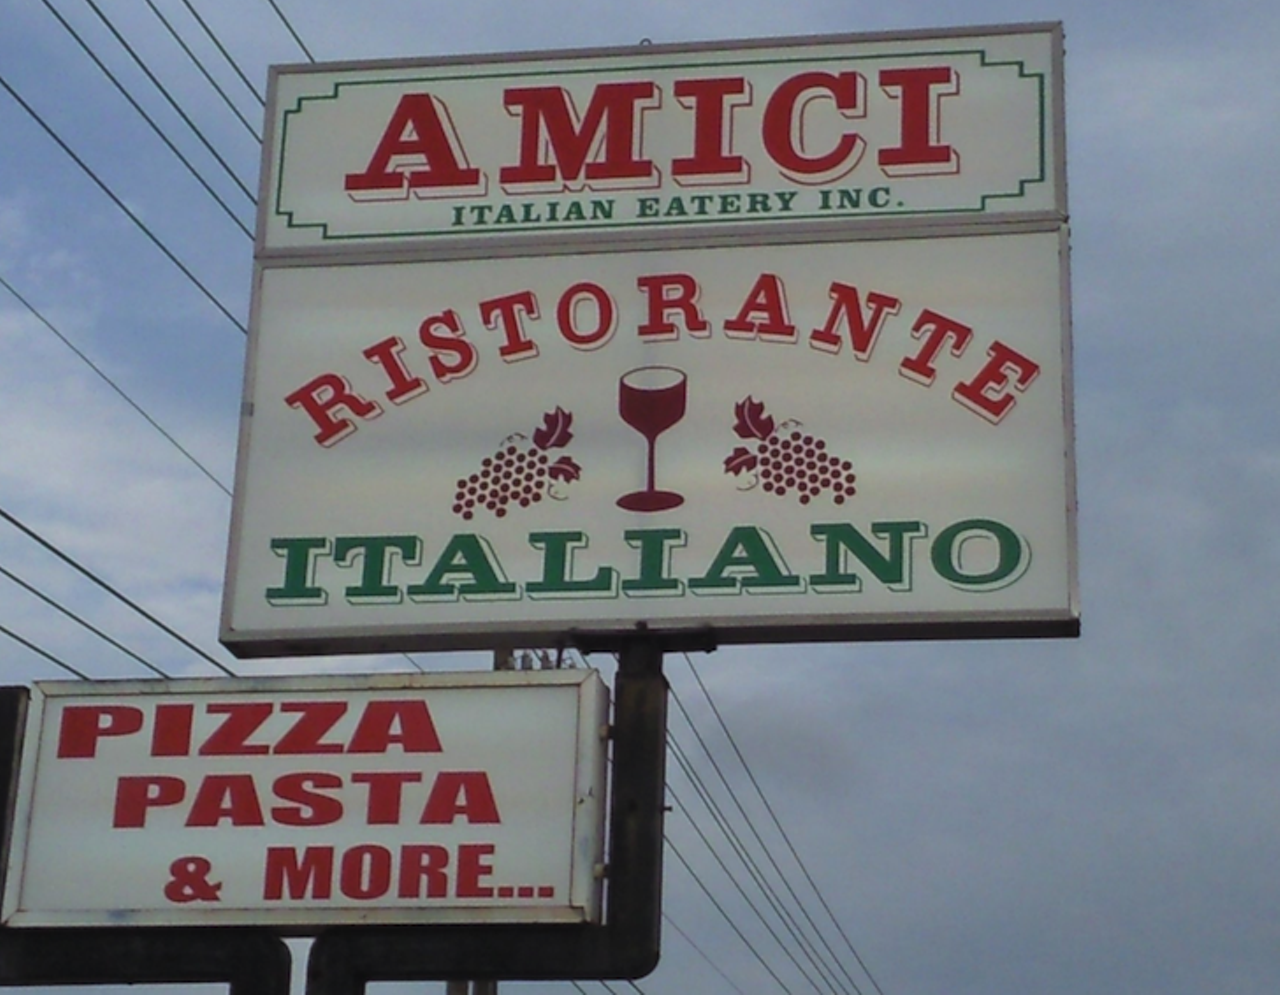 Amici Italian Eatery  
1901 W Bay Dr Ste A1, Largo
In the mood for Italian? Head to Amici&#146;s for classic Italian cuisine, with a rotating seasonal menu. Being that Amici&#146;s is a family restaurant, make sure to check in on their Facebook page periodically to see if the concept is closed for &#147;vacation.&#148;
Photo via Amici Italian Eatery/ Facebook